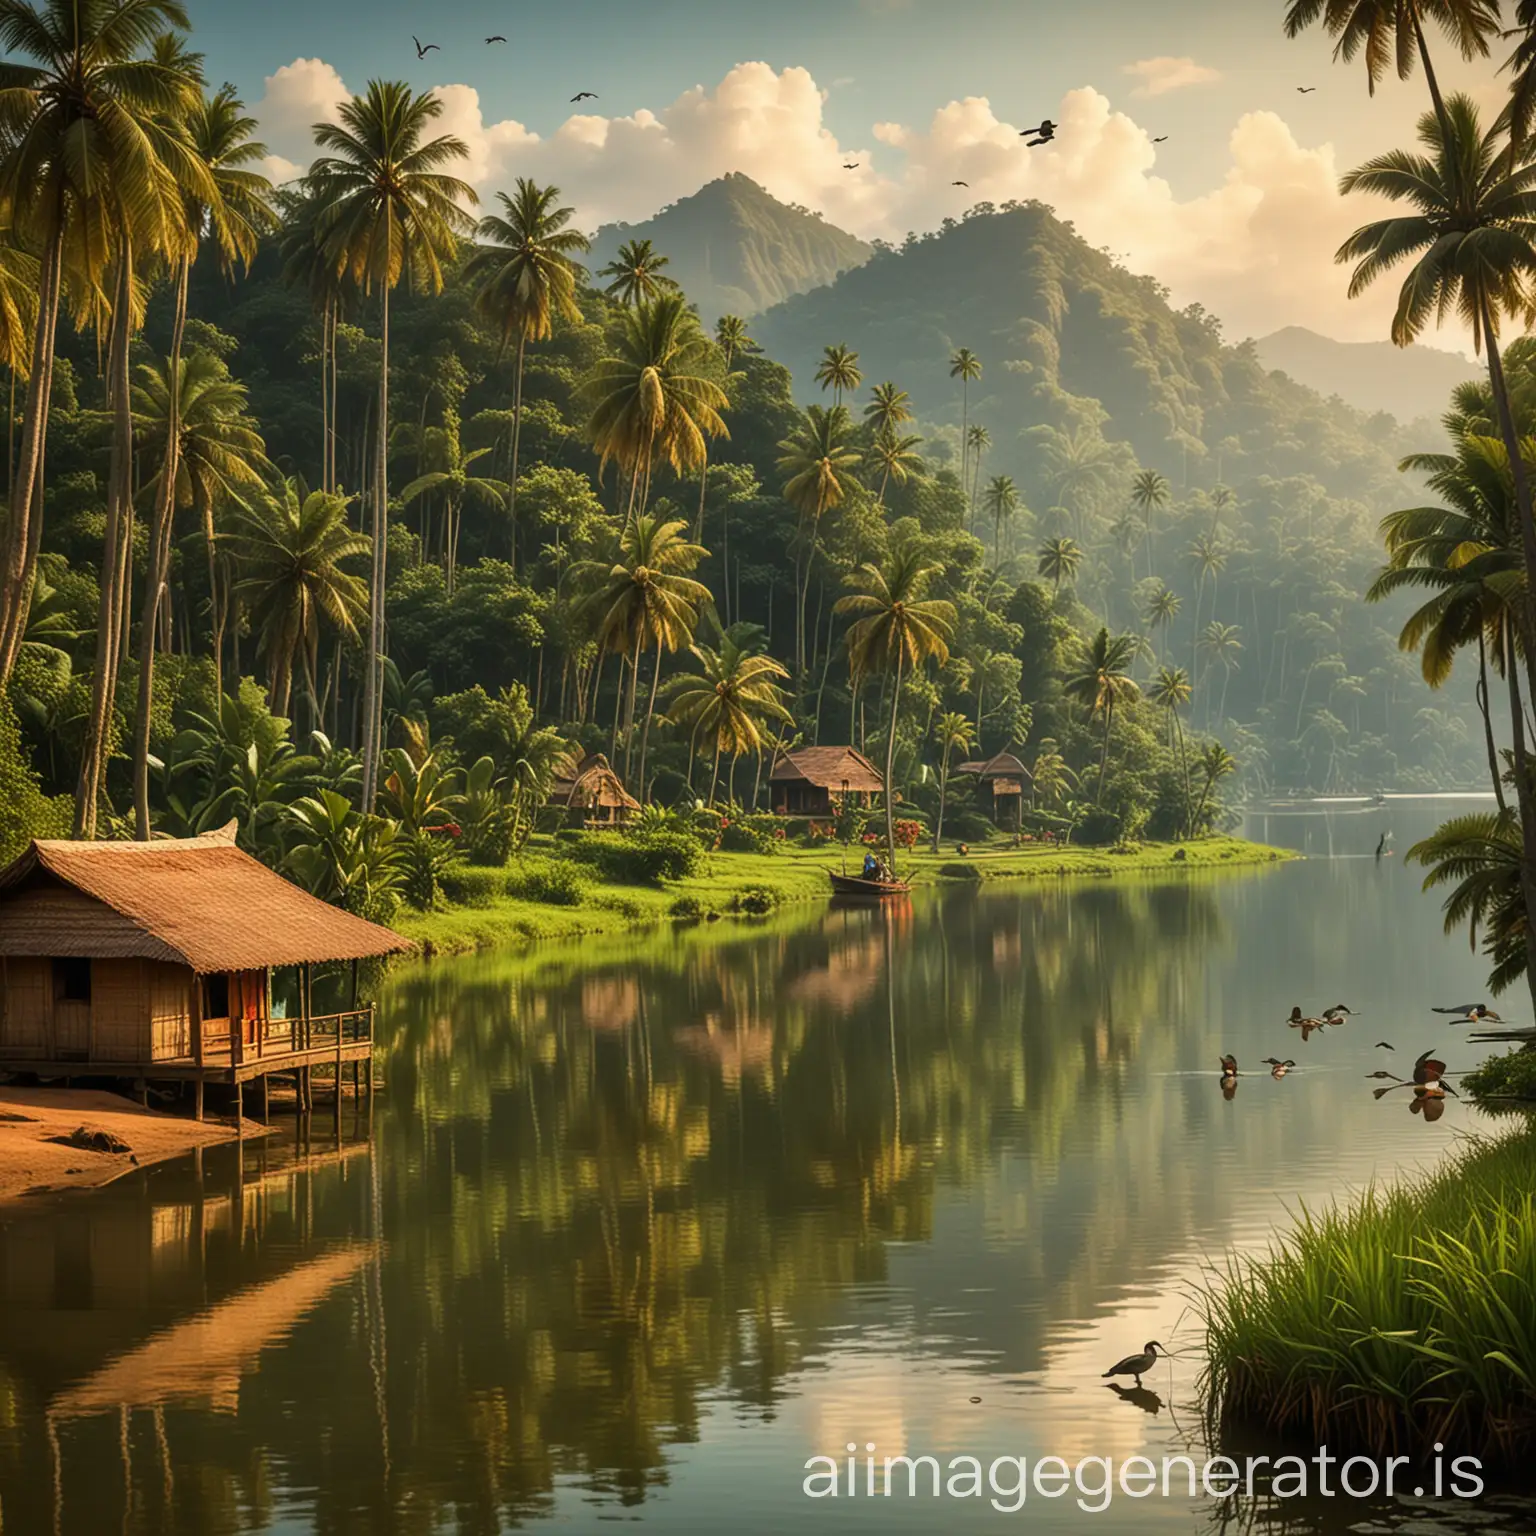 Serene-Kerala-Landscape-with-Mountains-Lakes-Huts-Birds-and-Animals